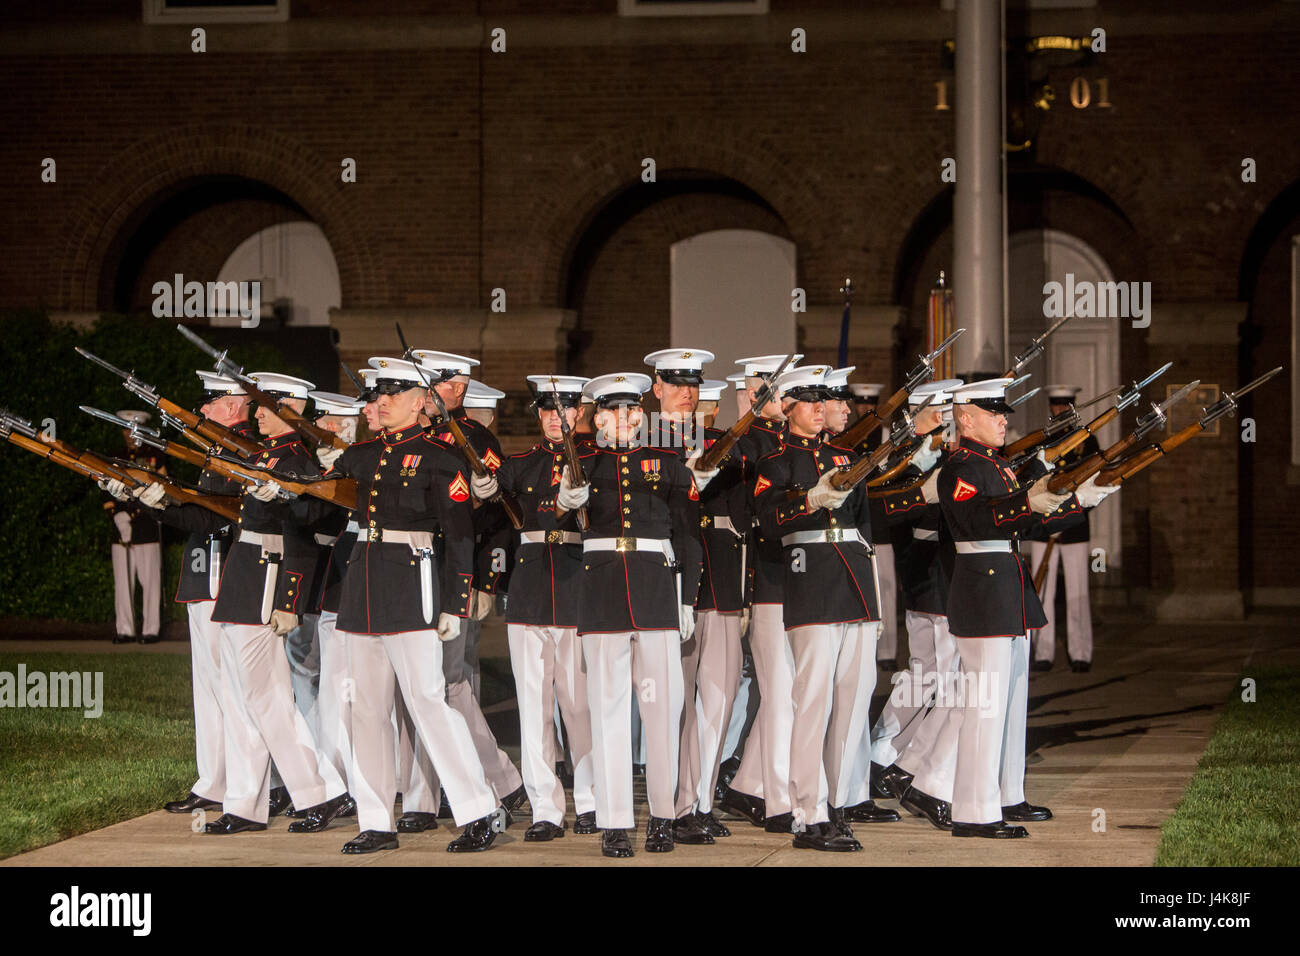 The U.S. Marine Corps Silent Drill Platoon executes the 'bursting bomb' during a Friday Evening Parade at Marine Barracks Washington D.C., May 5, 2017. The guests of honor for the parade were Rep. Paul Cook of California’s 8th Congressional District, Rep. Jack Bergman of Michigan’s 1st Congressional District, and Rep. Salud Carbajal of California’s 24th Congressional District. The hosting official was Gen. Glenn Walters, the assistant commandant of the Marine Corps. (U.S. Marine Corps photo by Cpl. Robert Knapp) Stock Photo